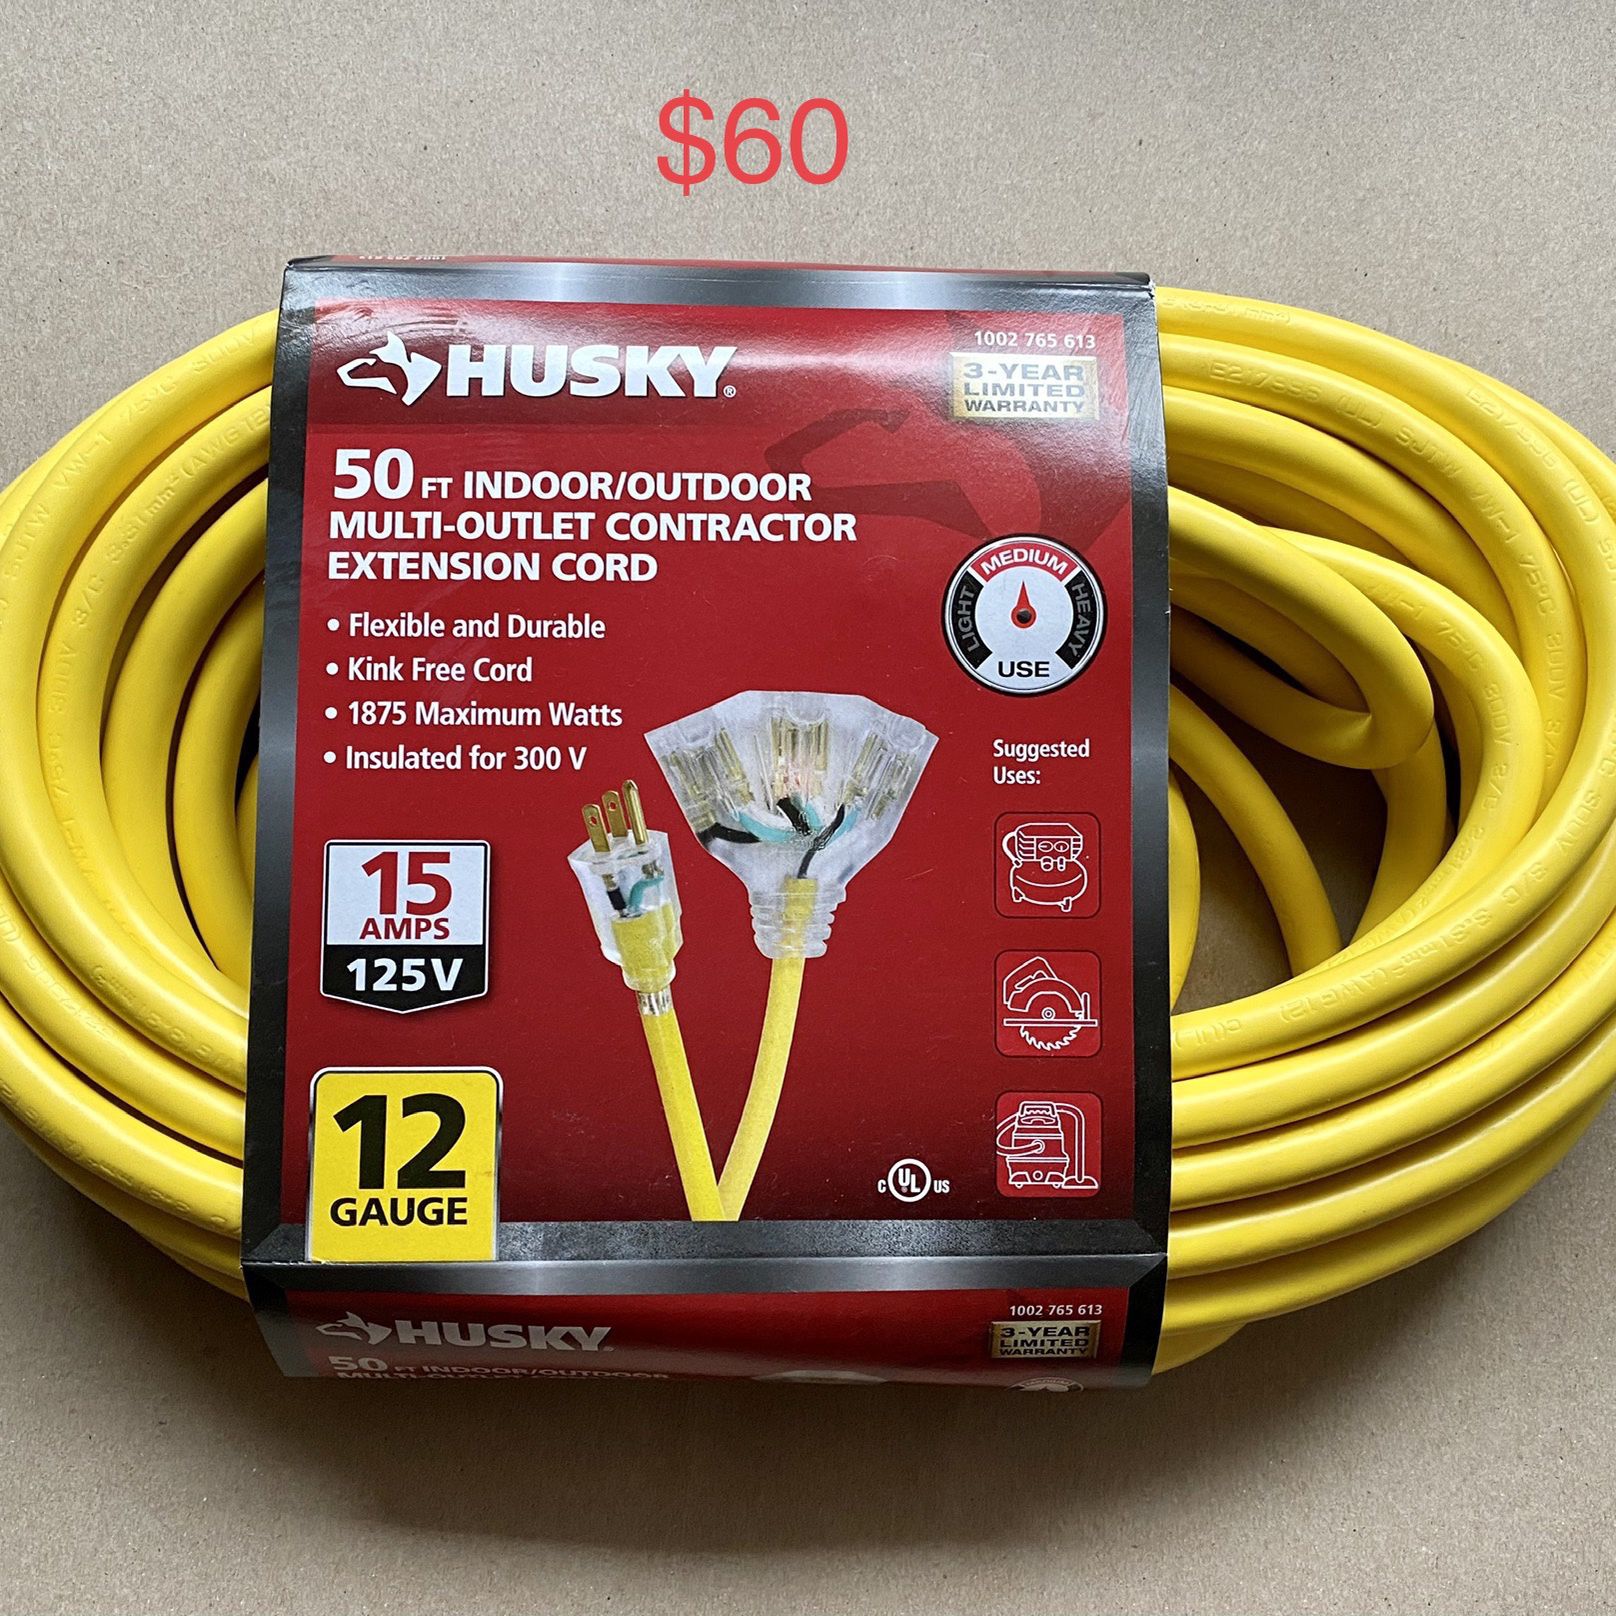 HUSKY 50 FT INDOOR / OUTDOOR MULTI-OUTLET CONTRACTOR EXTENSION CORD for  Sale in Tucker, GA - OfferUp